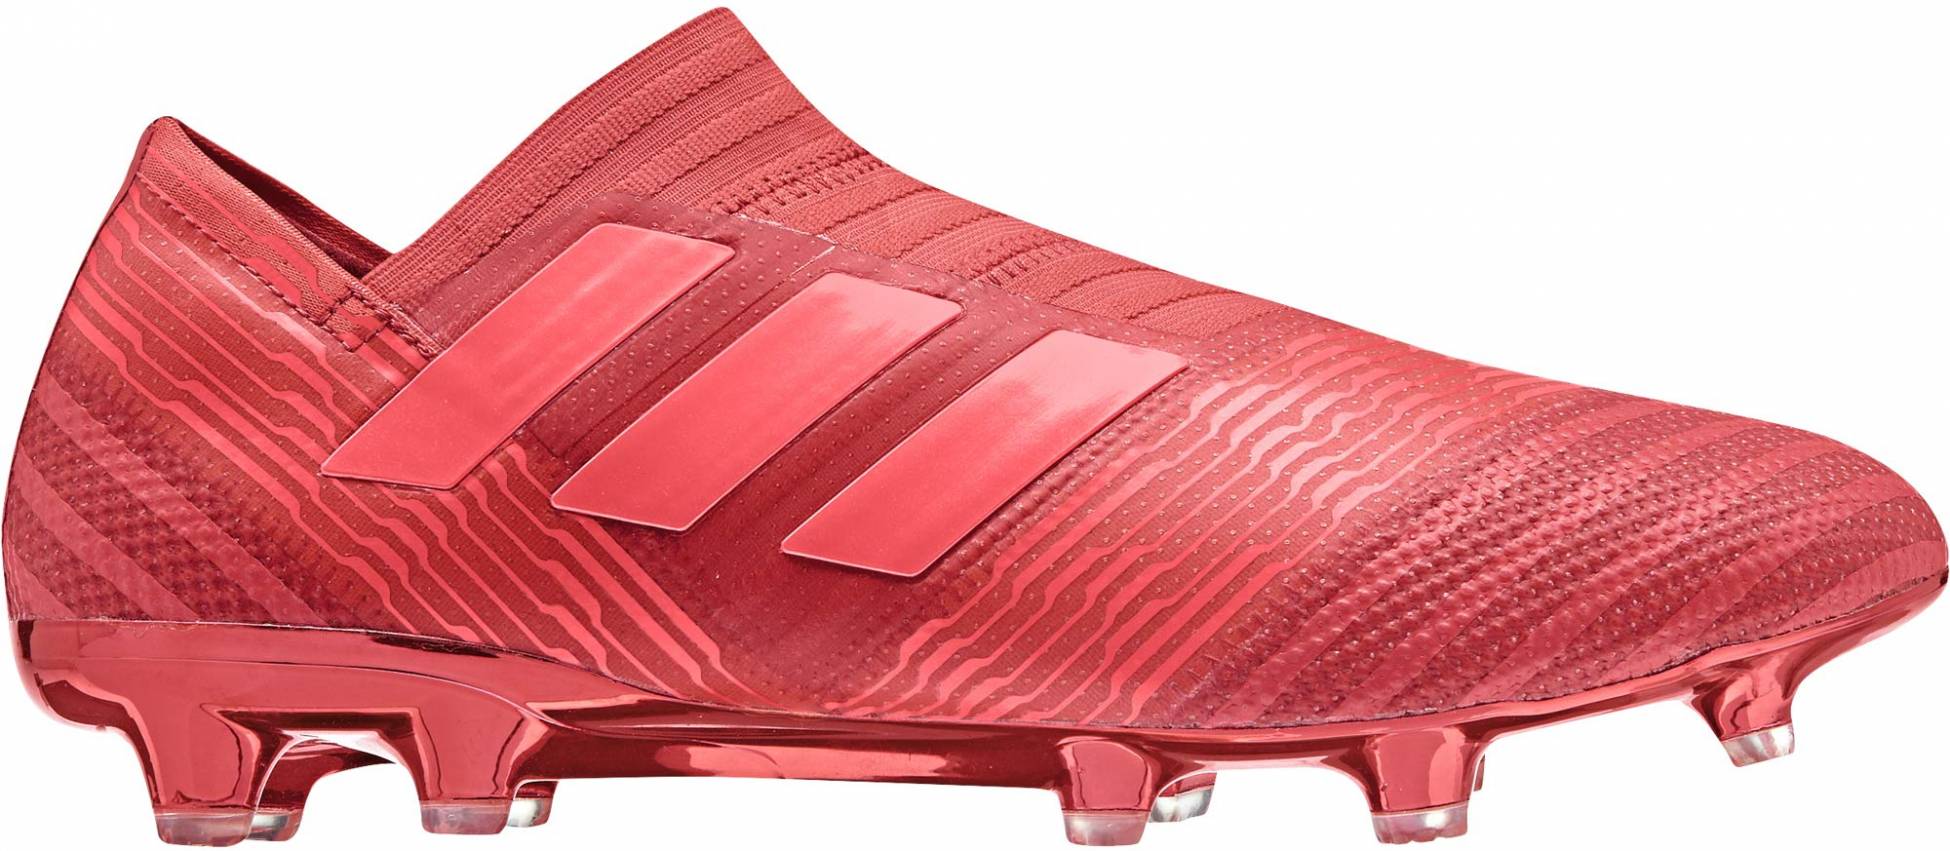 laceless football boots